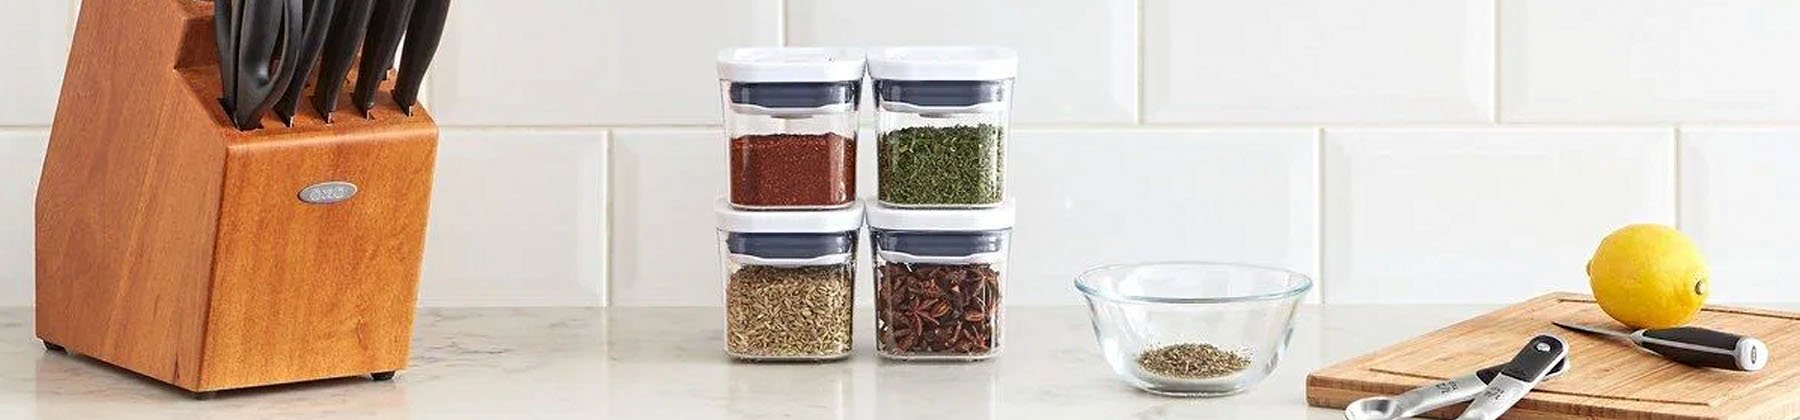 Photo of OXO food storage containers on a countertop.